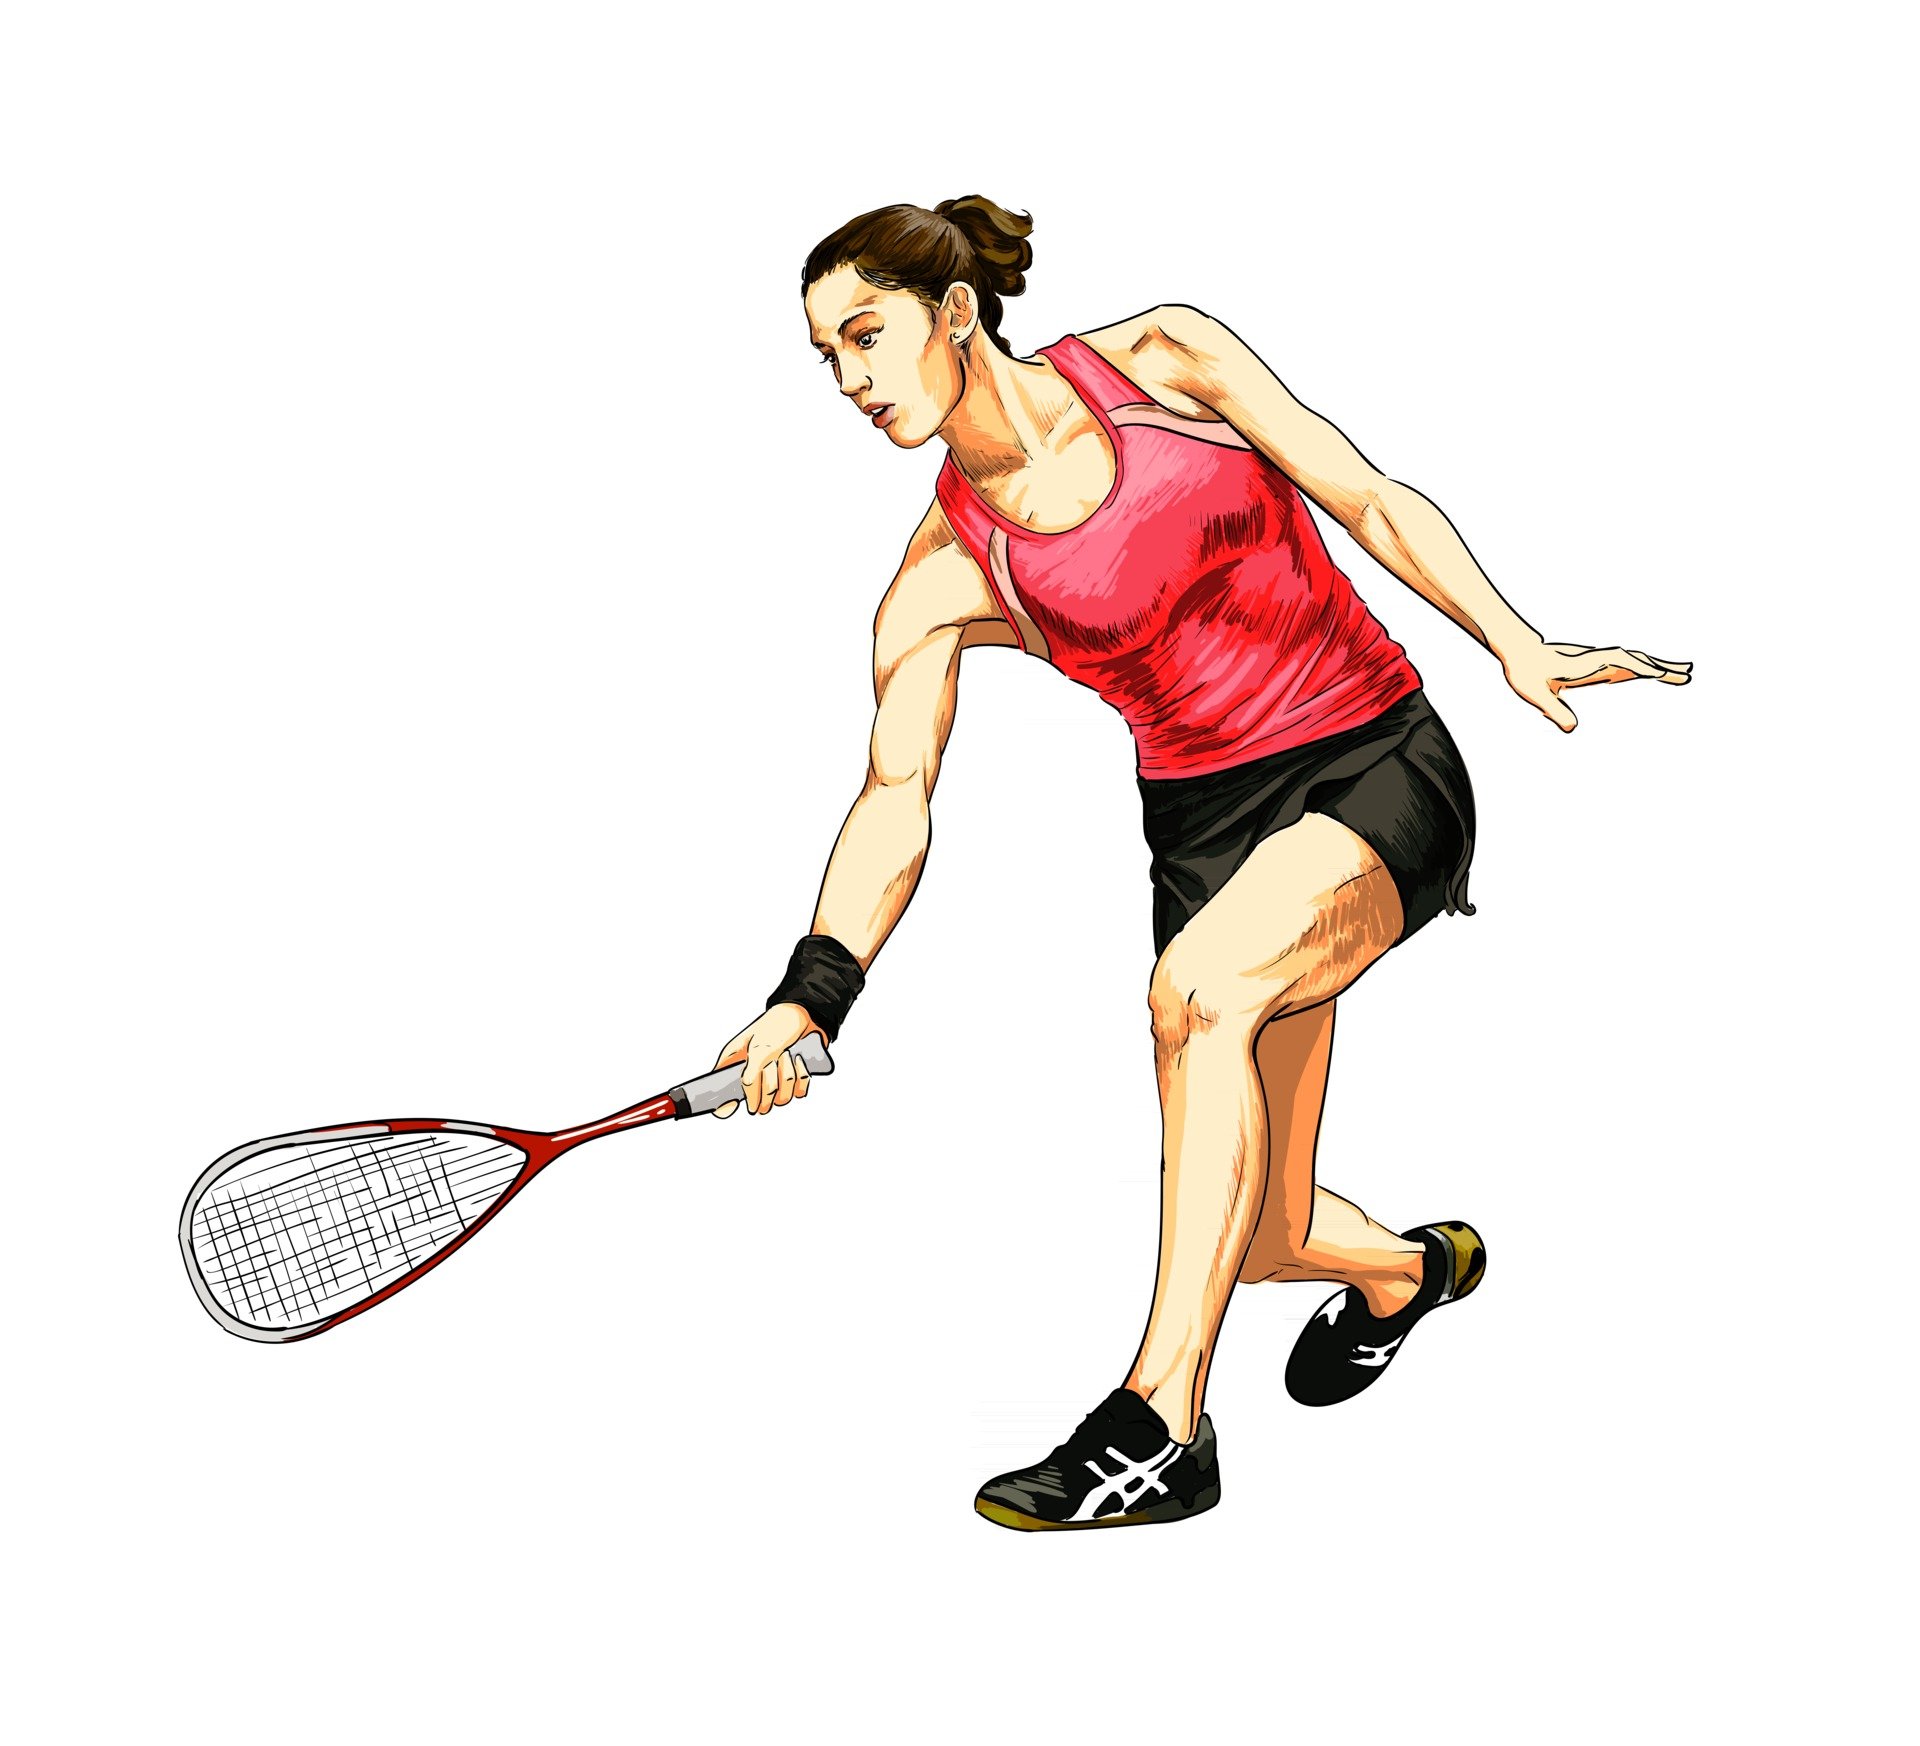 abstract-young-woman-does-an-exercise-with-a-racket-on-her-right-hand-in-squash-from-splash-of-watercolors-squash-game-training-illustration-of-paints-vector.jpeg